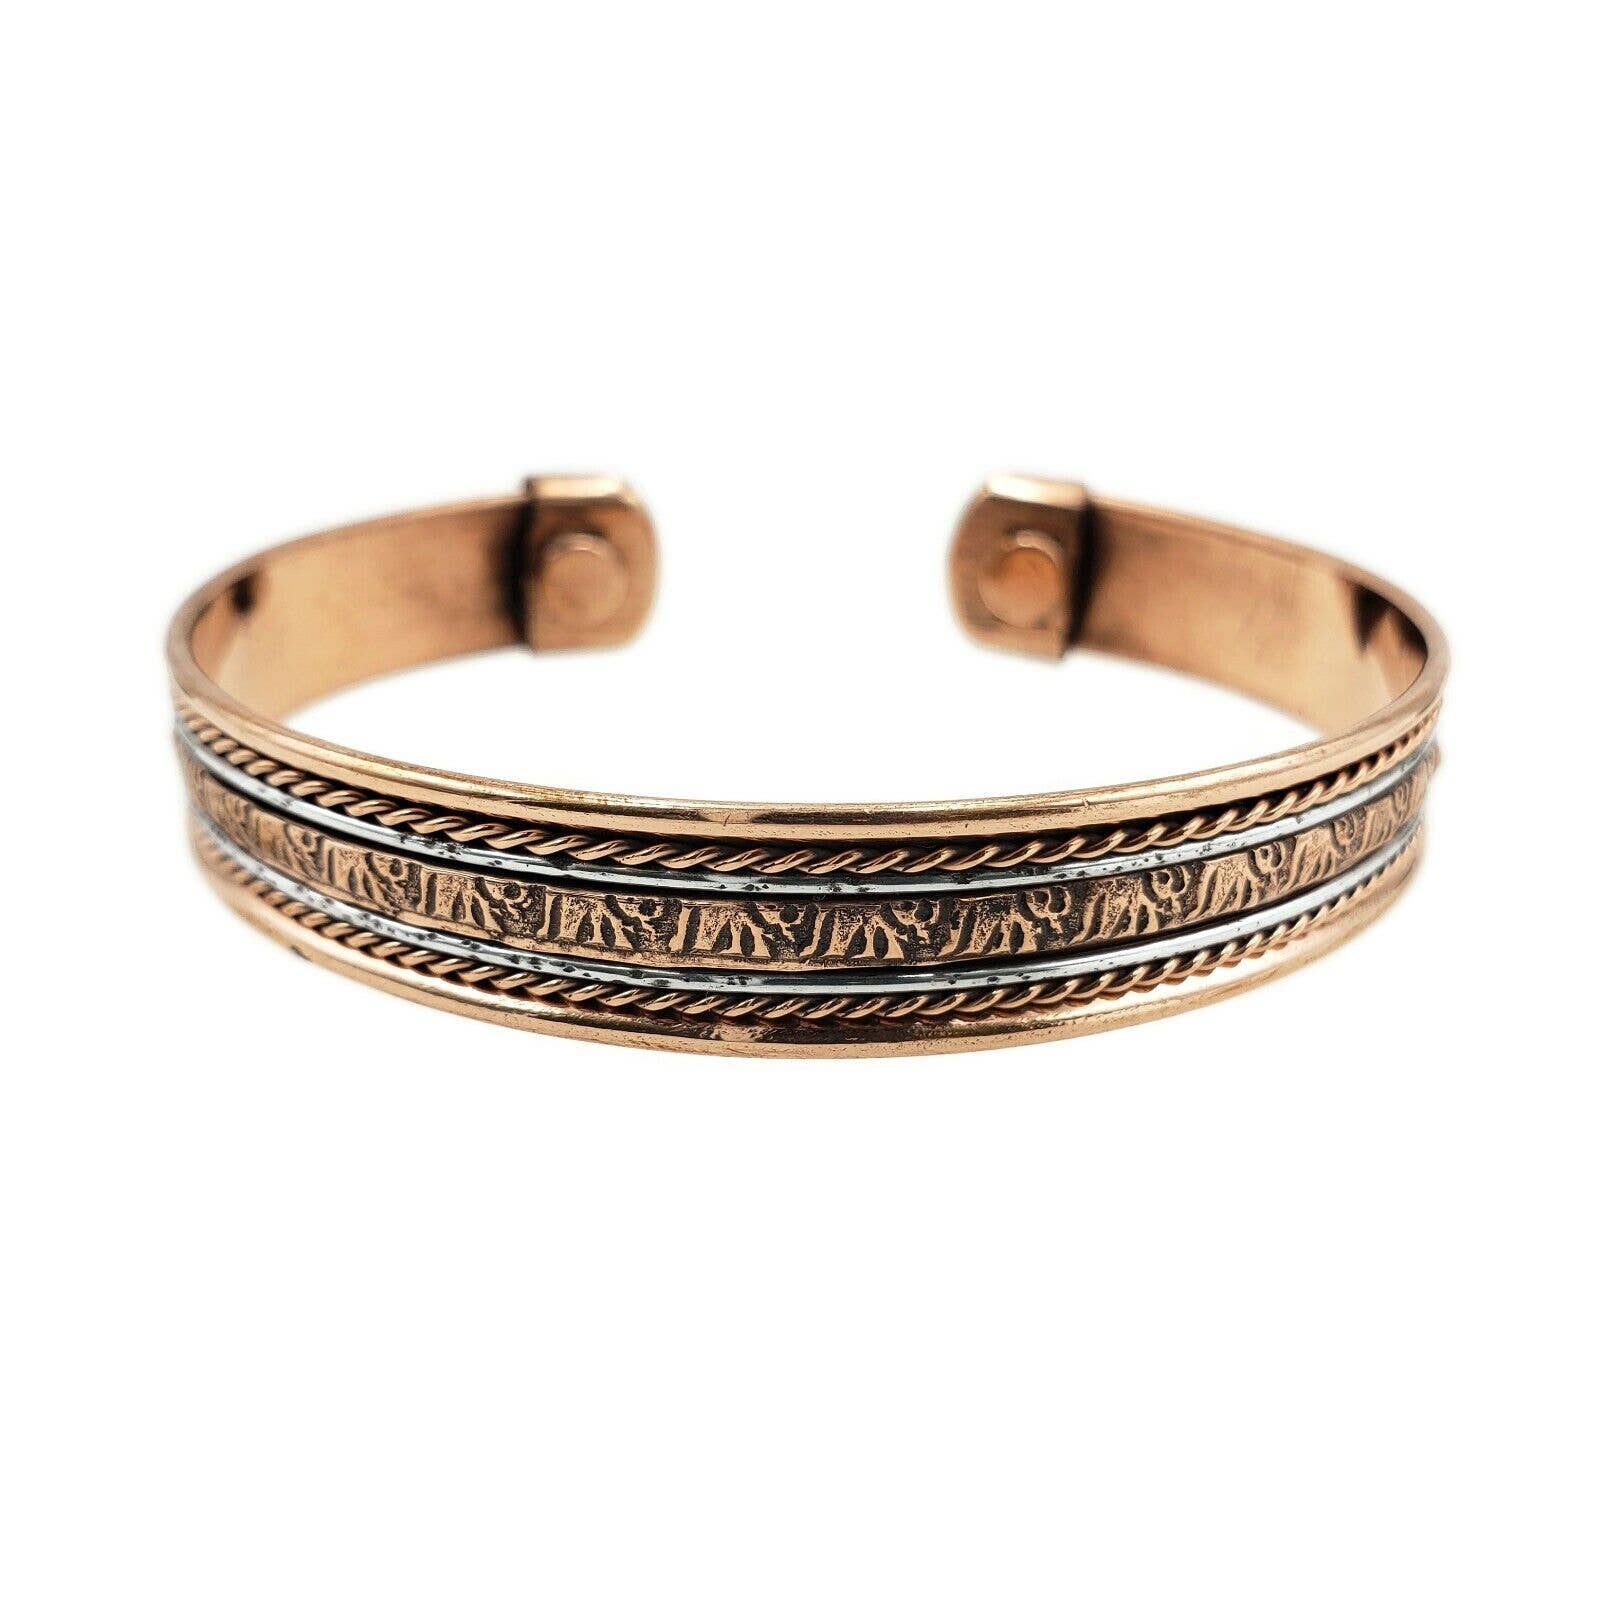 Unisex Men Women Pure Magnetic Copper Bracelet With 6 Magnets Arthritis  Pain Relief Healing Therapy Cuff Bangle  LaLaBix